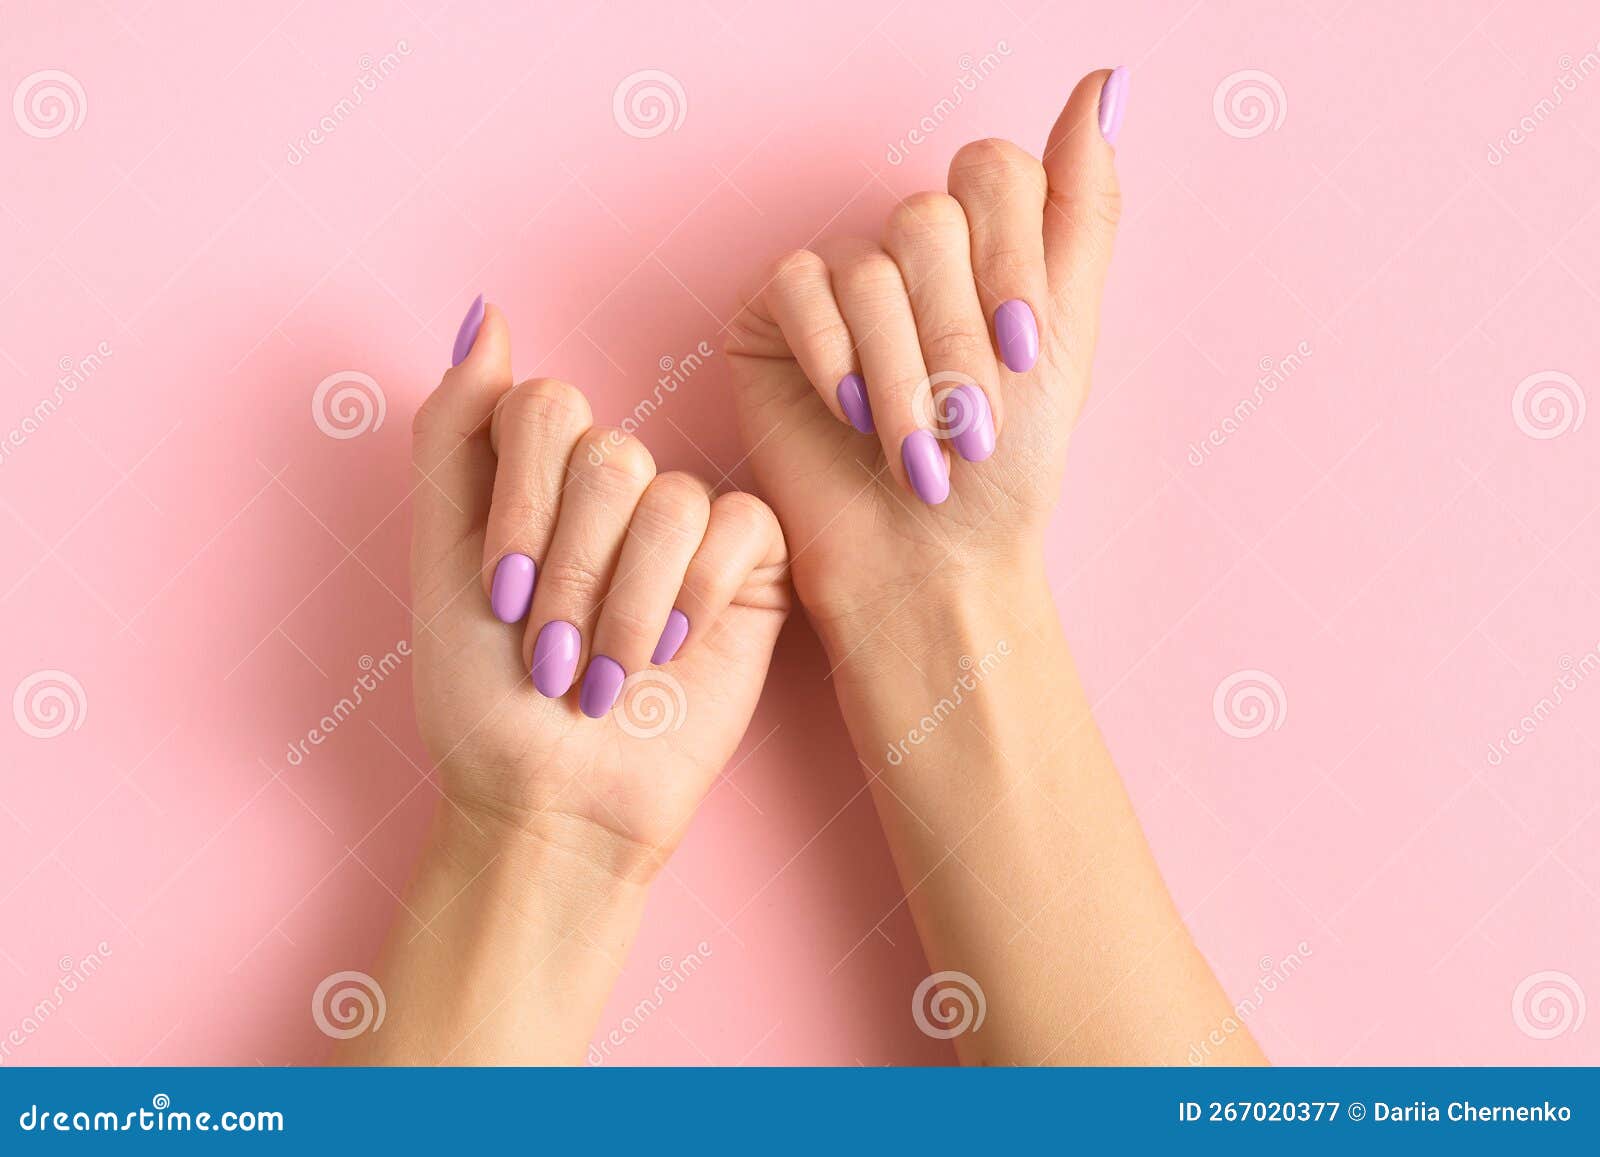 7. Pink and Purple Tie-Dye Nails for Summer - wide 5